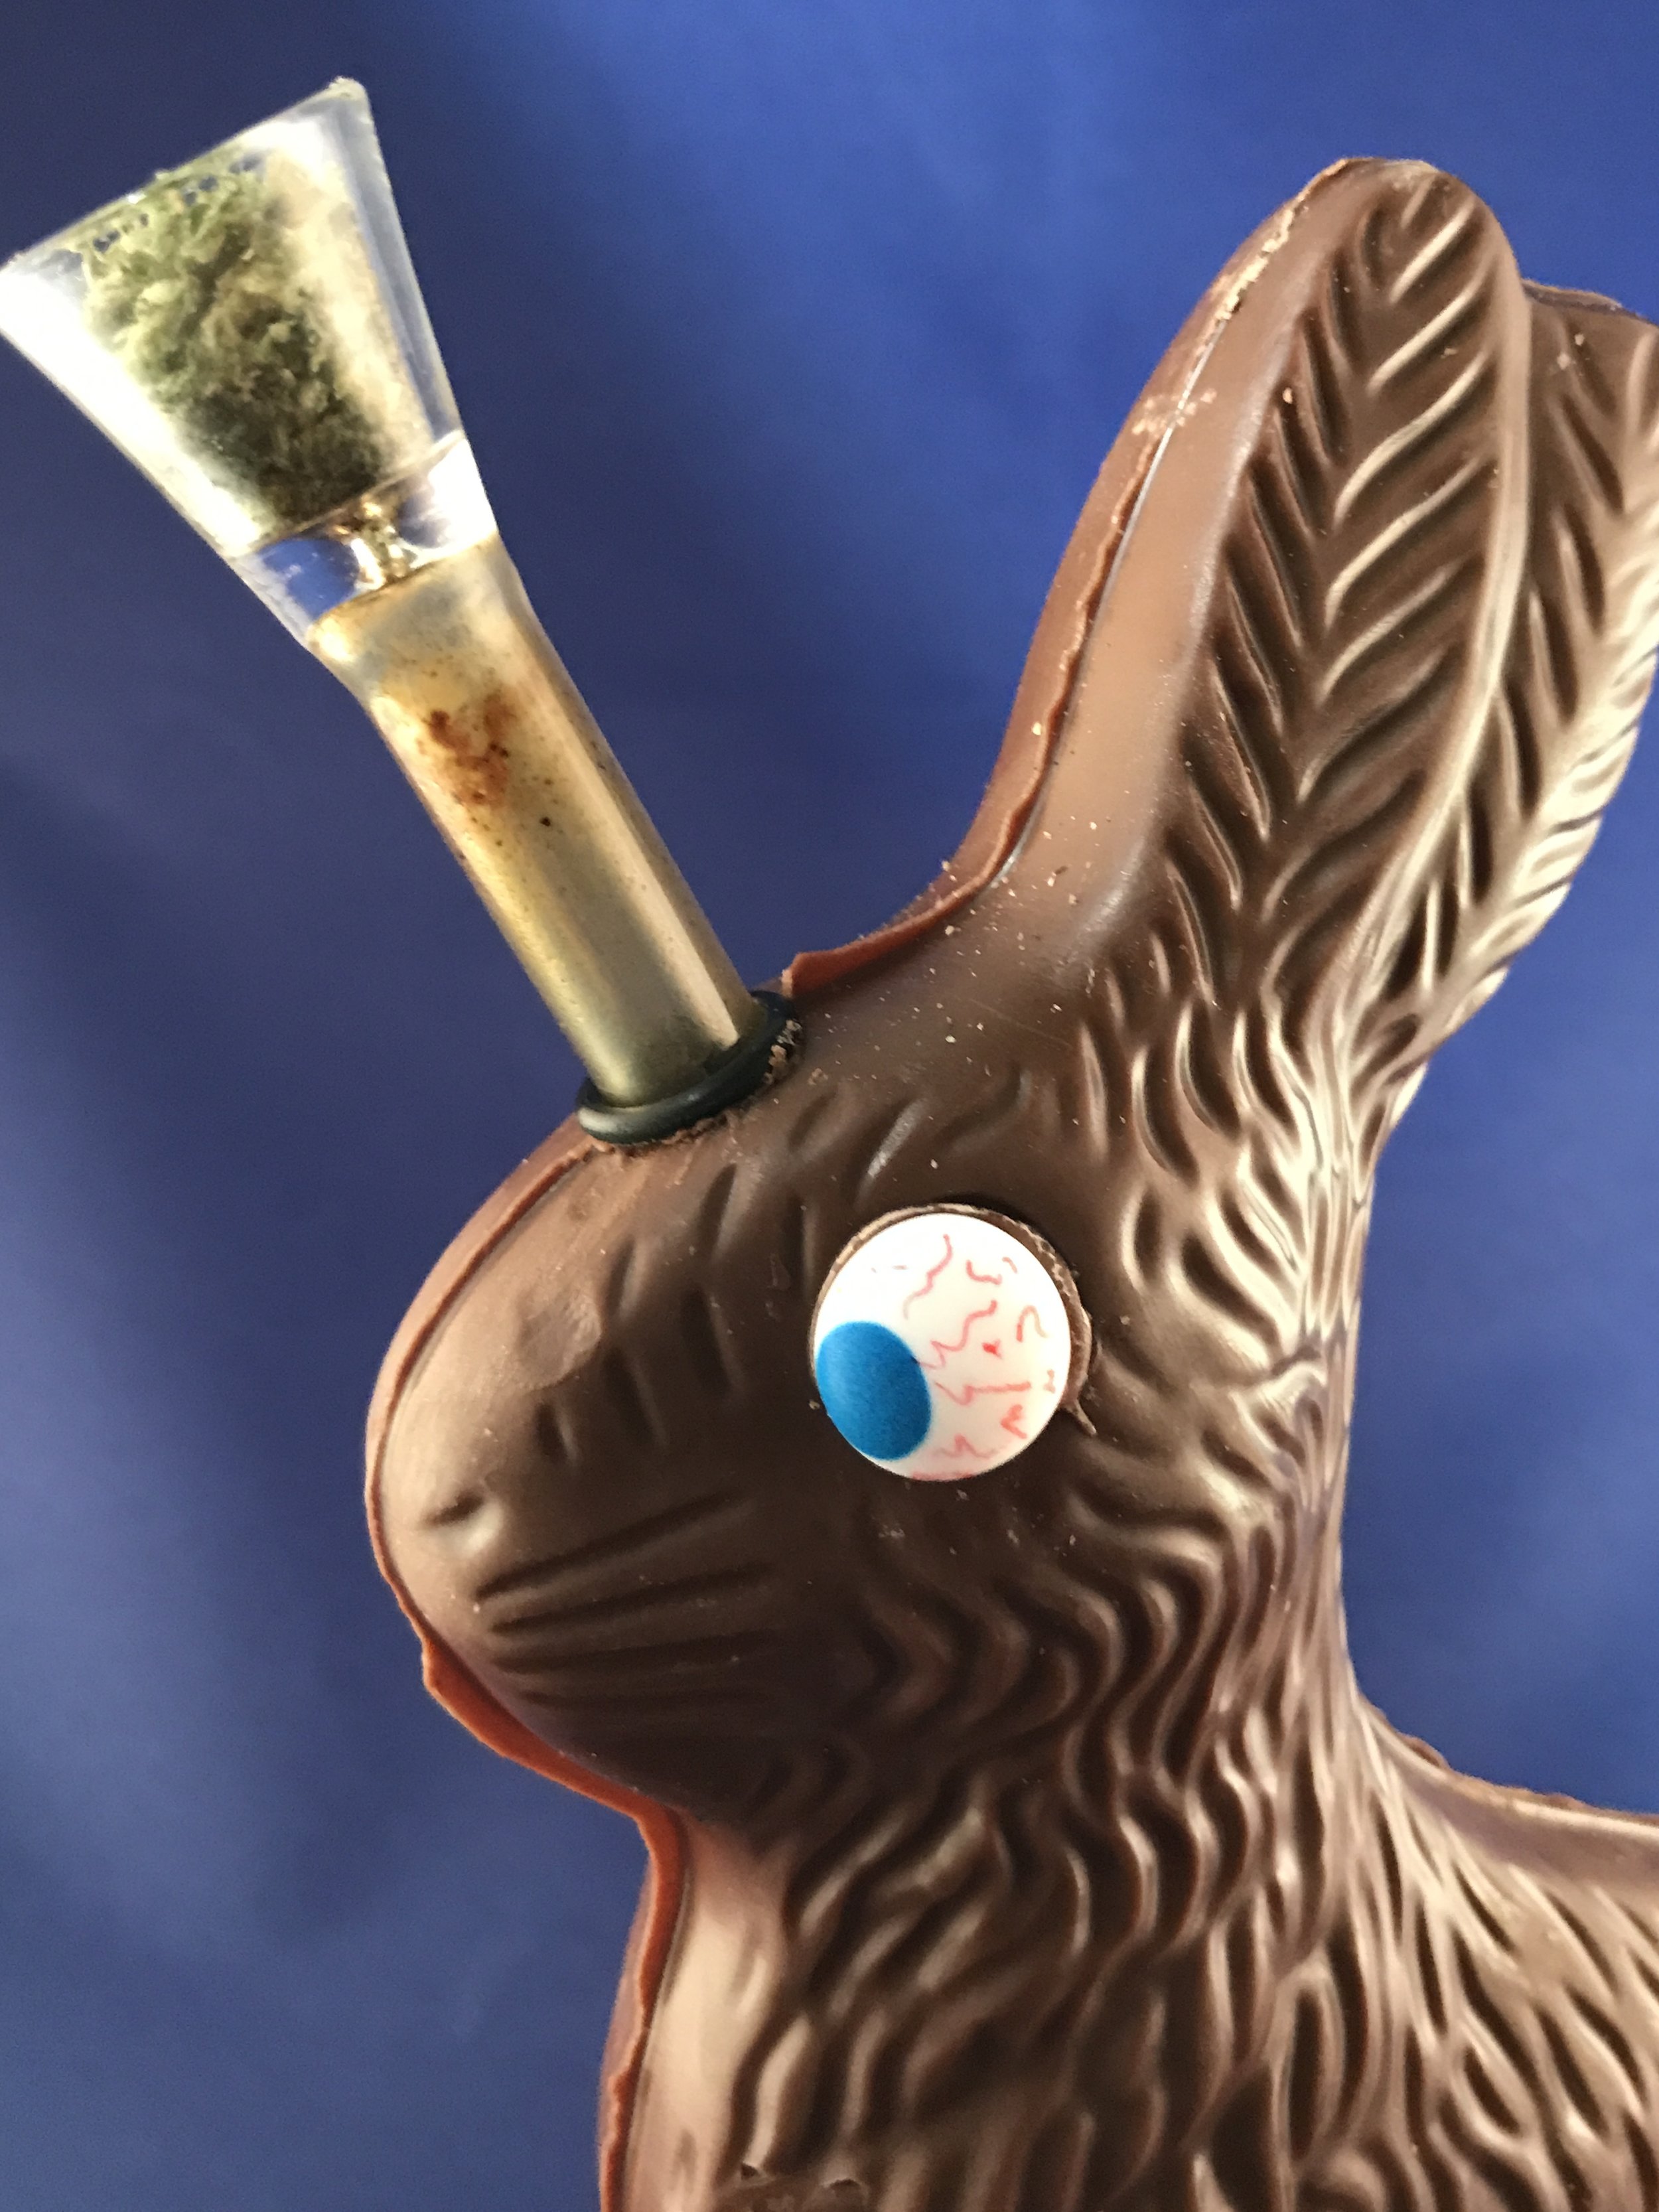 Chocolate Easter Bunny Pipe: Stoner Food Pipe